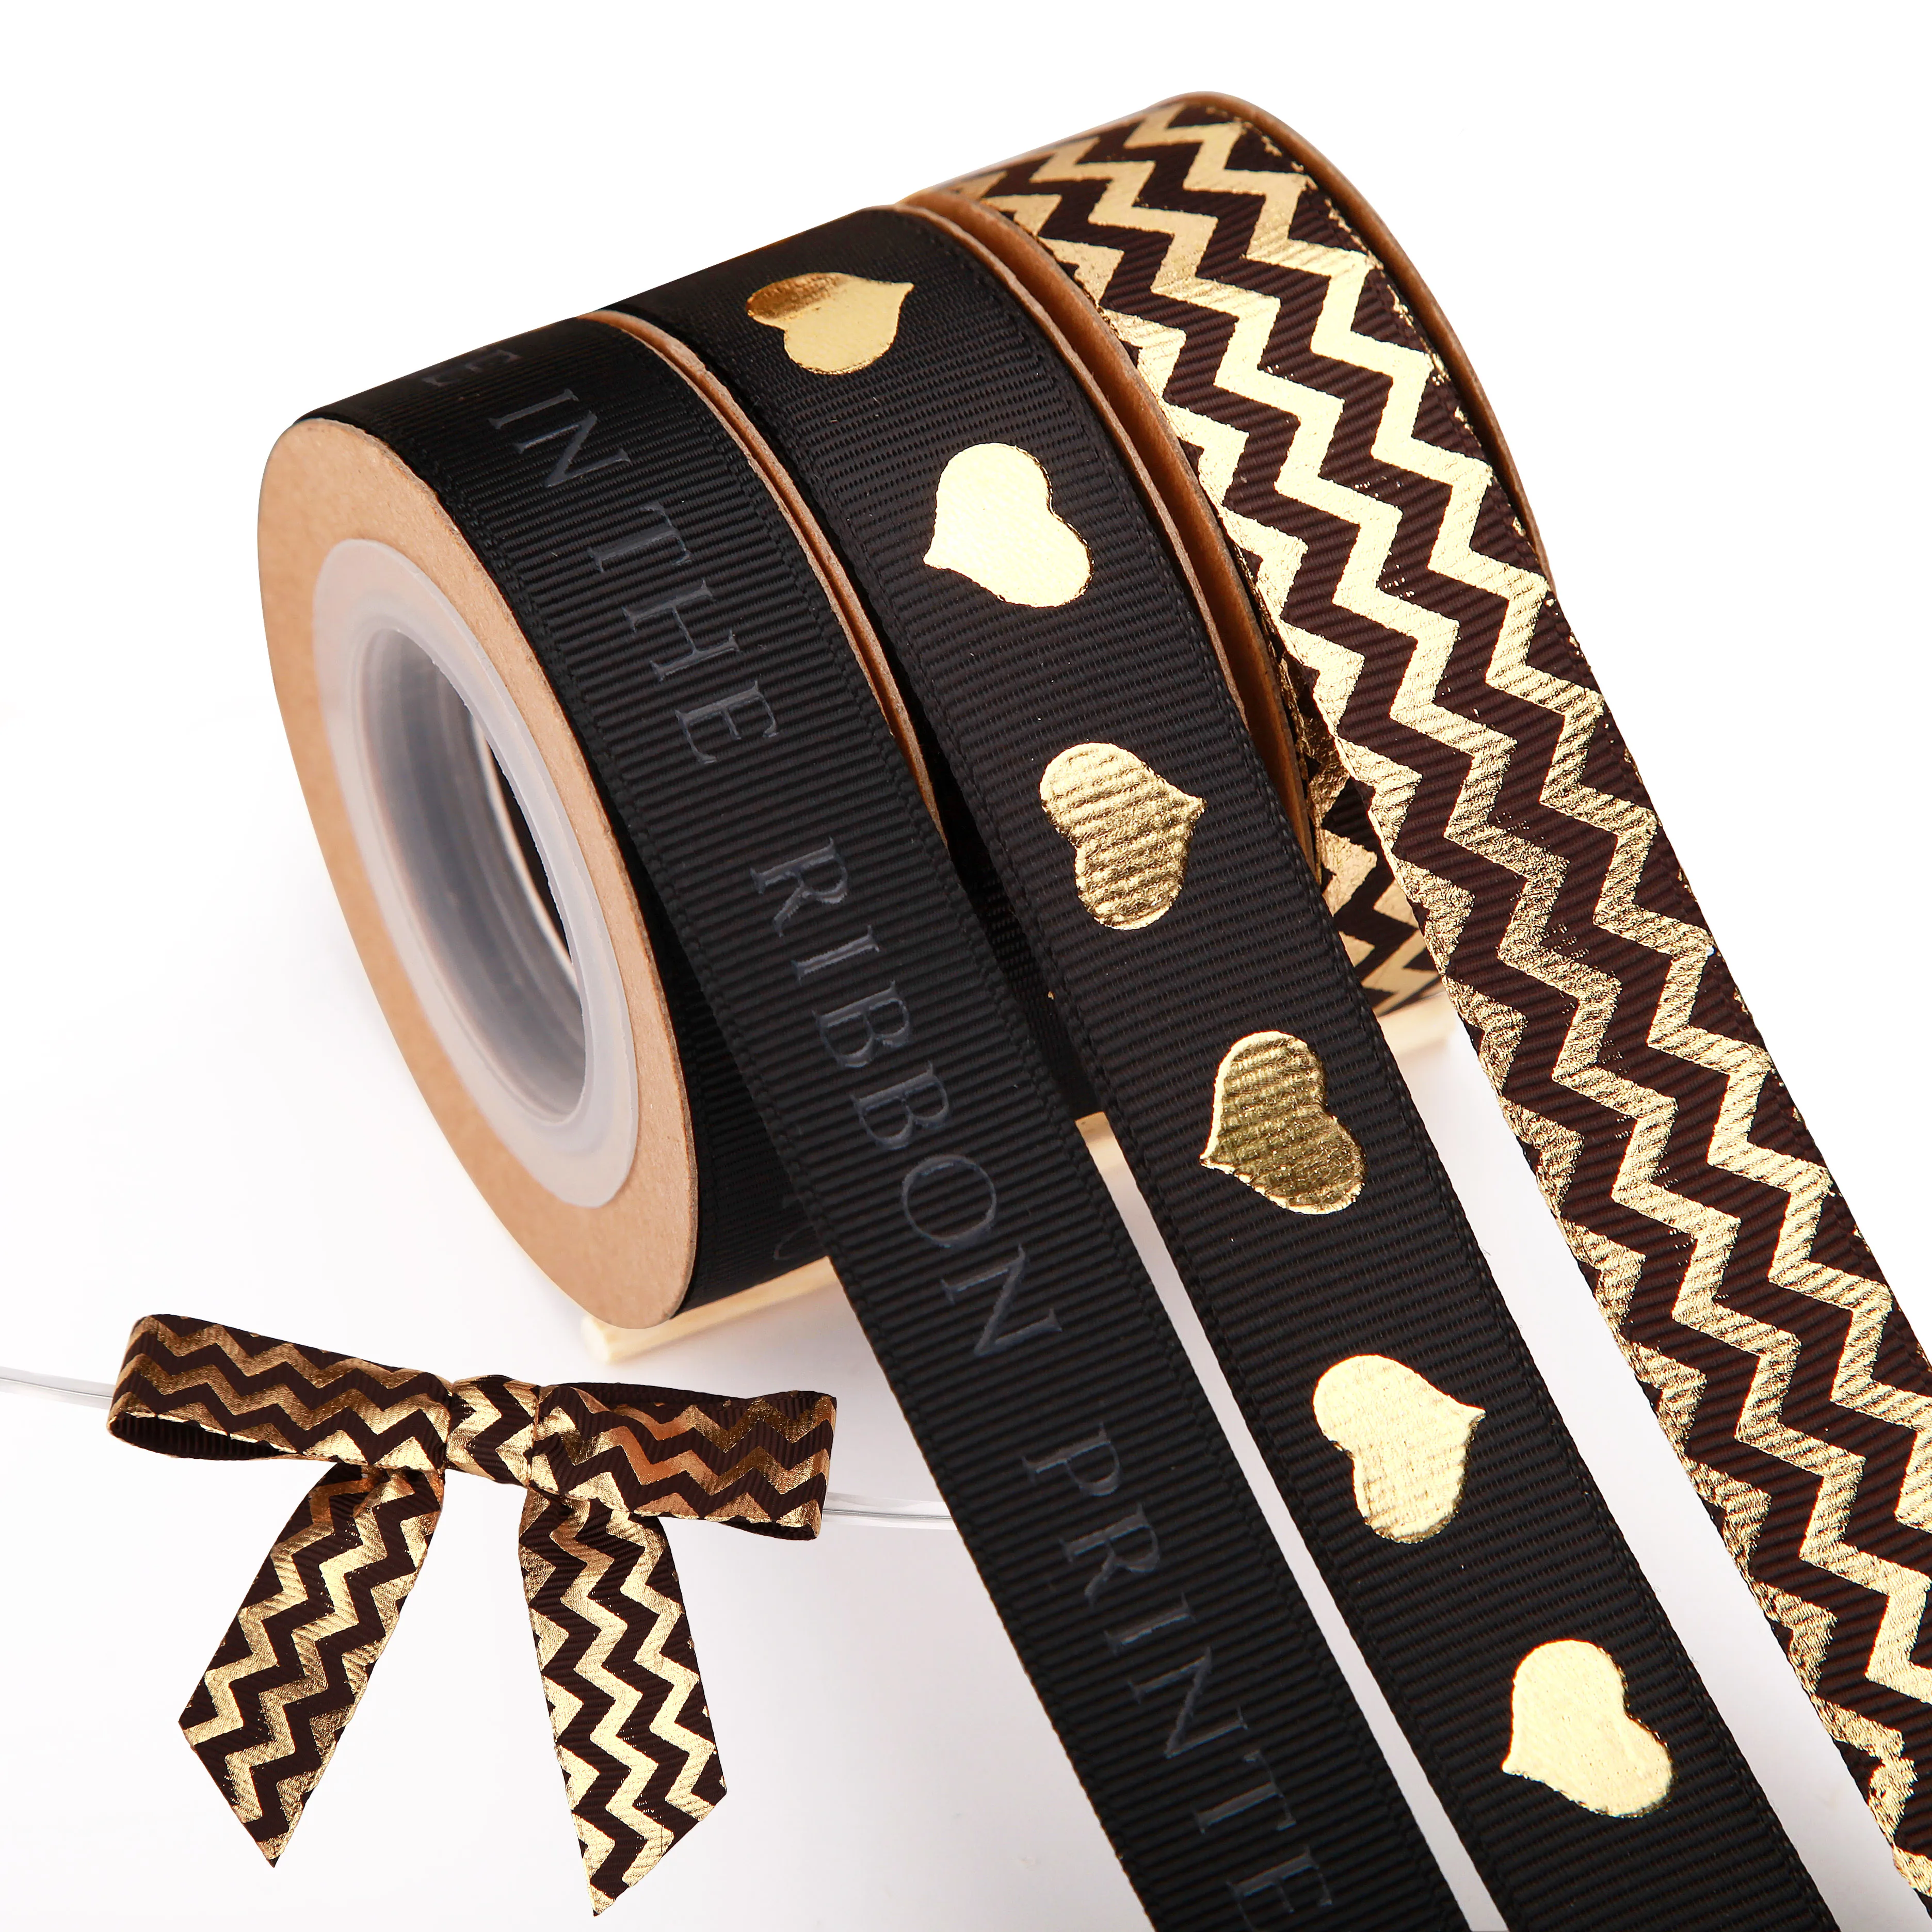 Congratulations in gold on a black background printed on 5/8 dijon gold  satin ribbon, 10 Yards